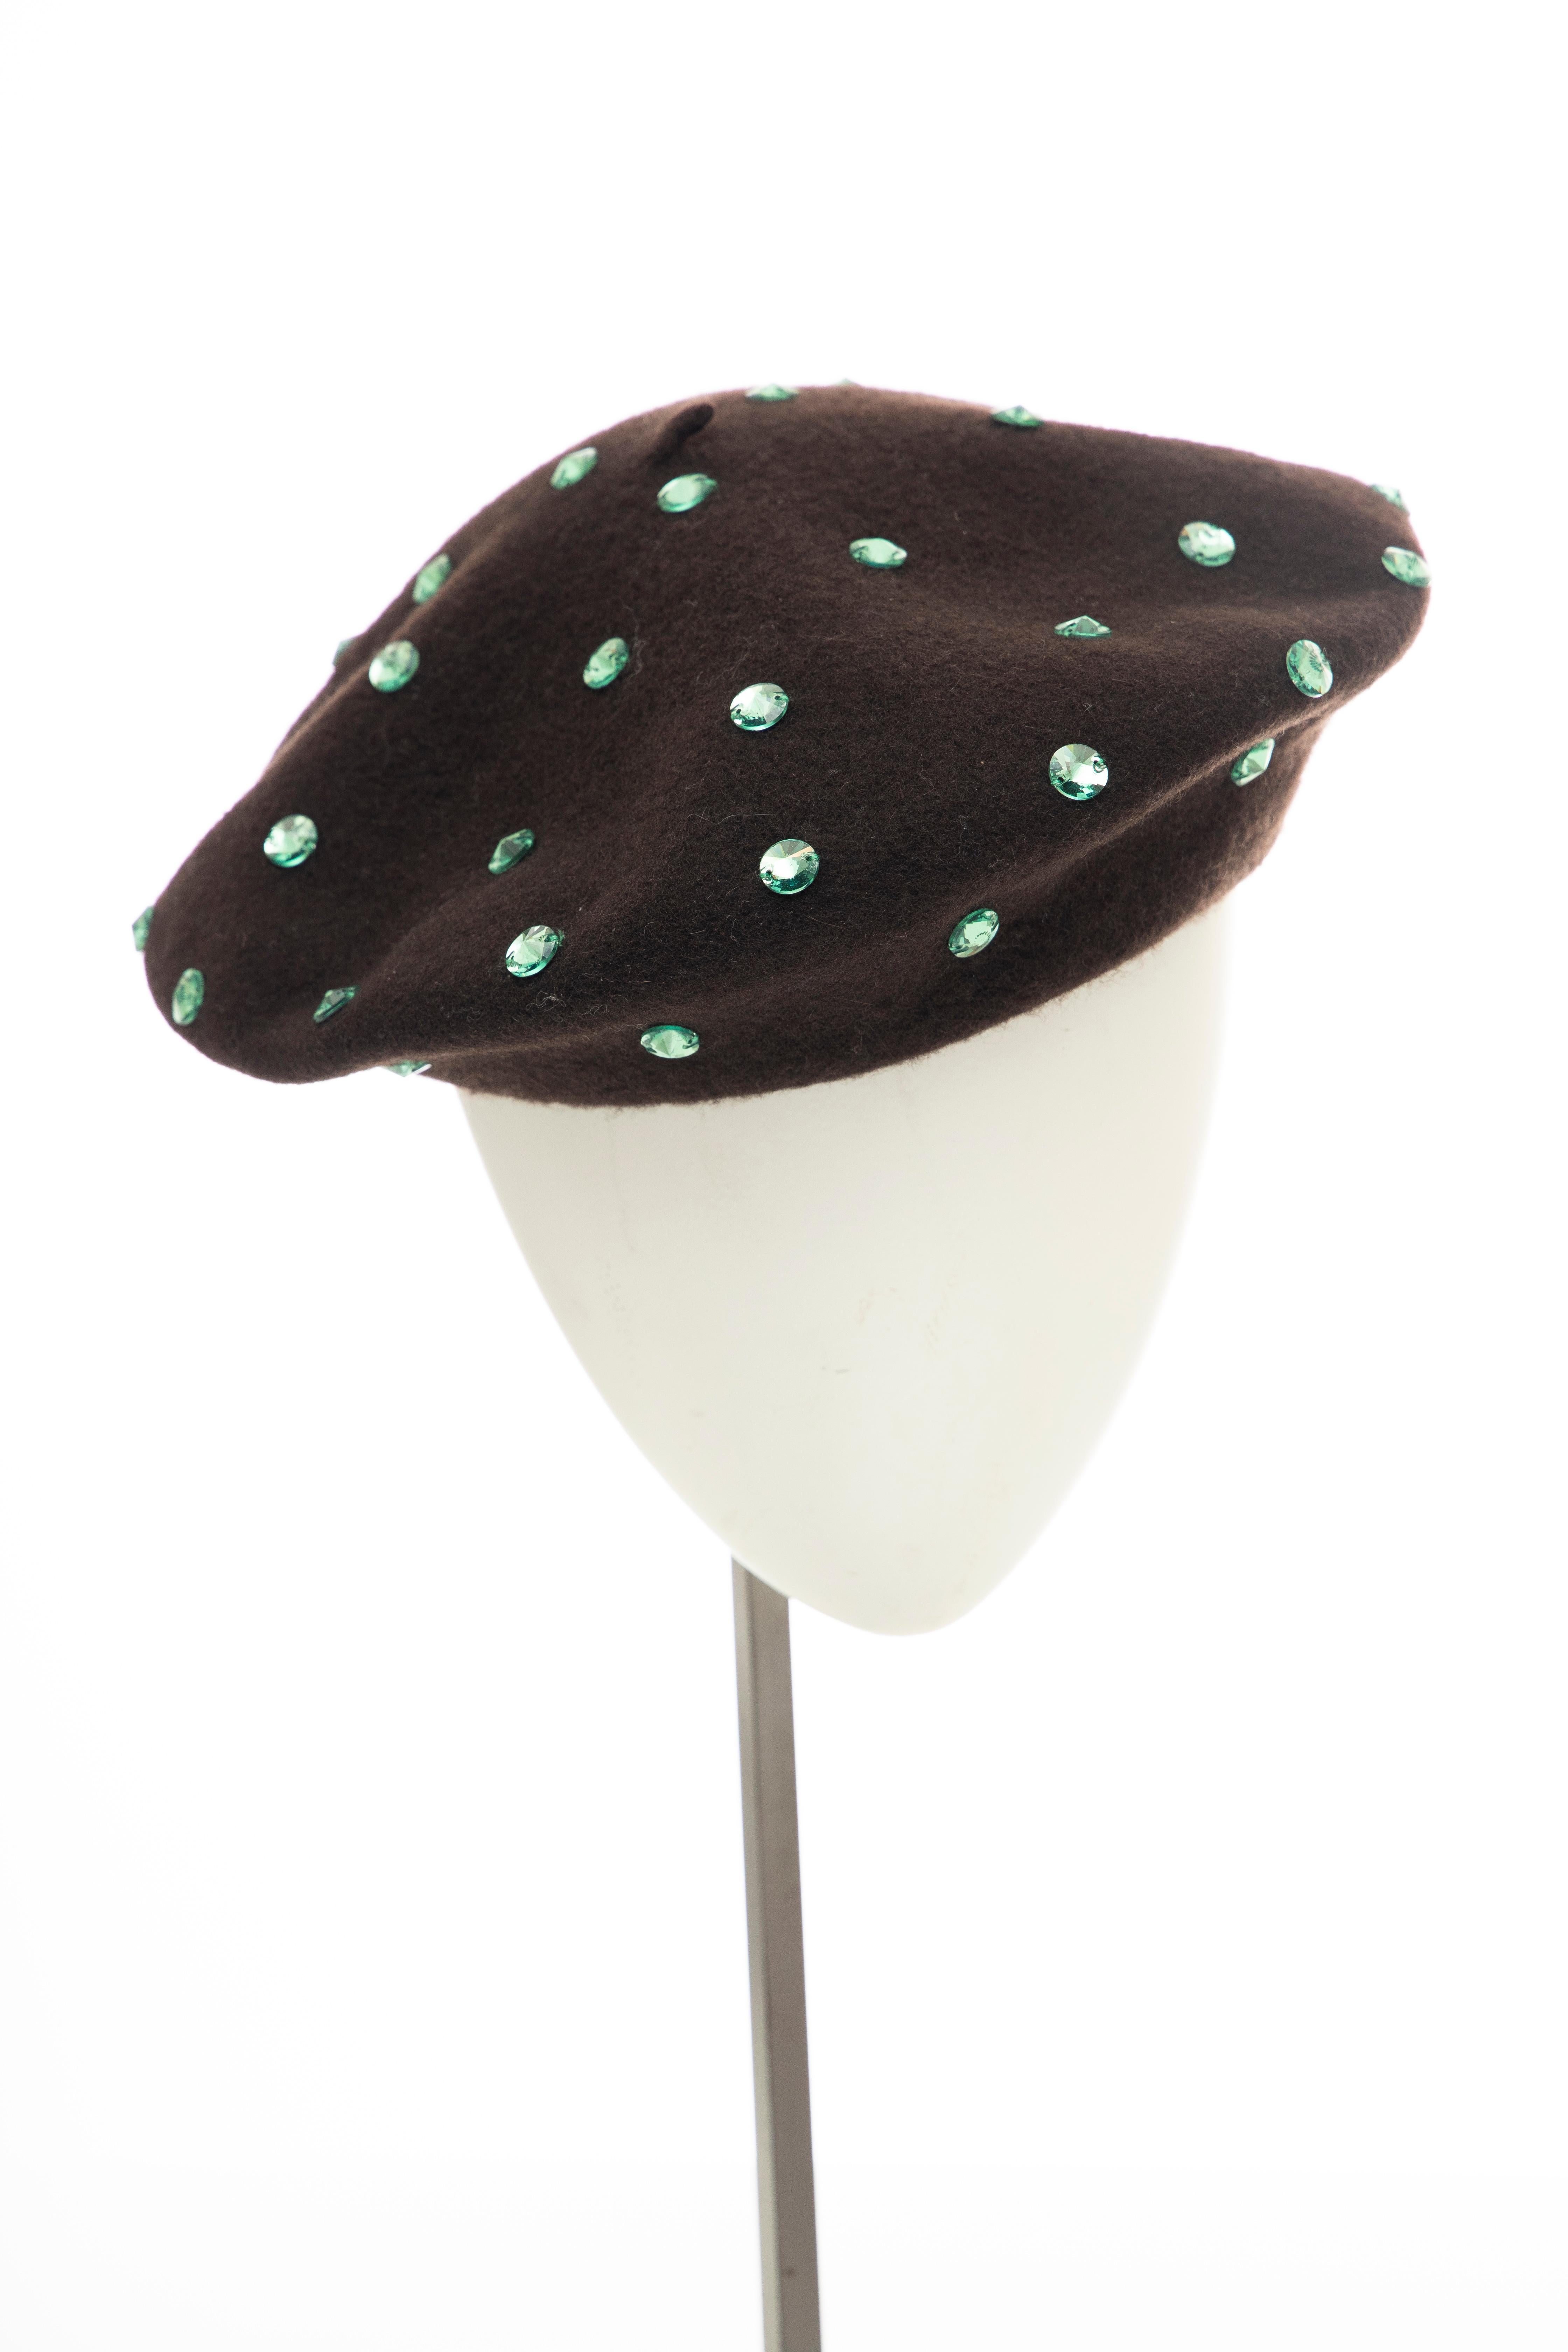 Green Dolce & Gabbana Wool Chocolate Brown Turquoise Cut Crystals Beret, Fall 2000